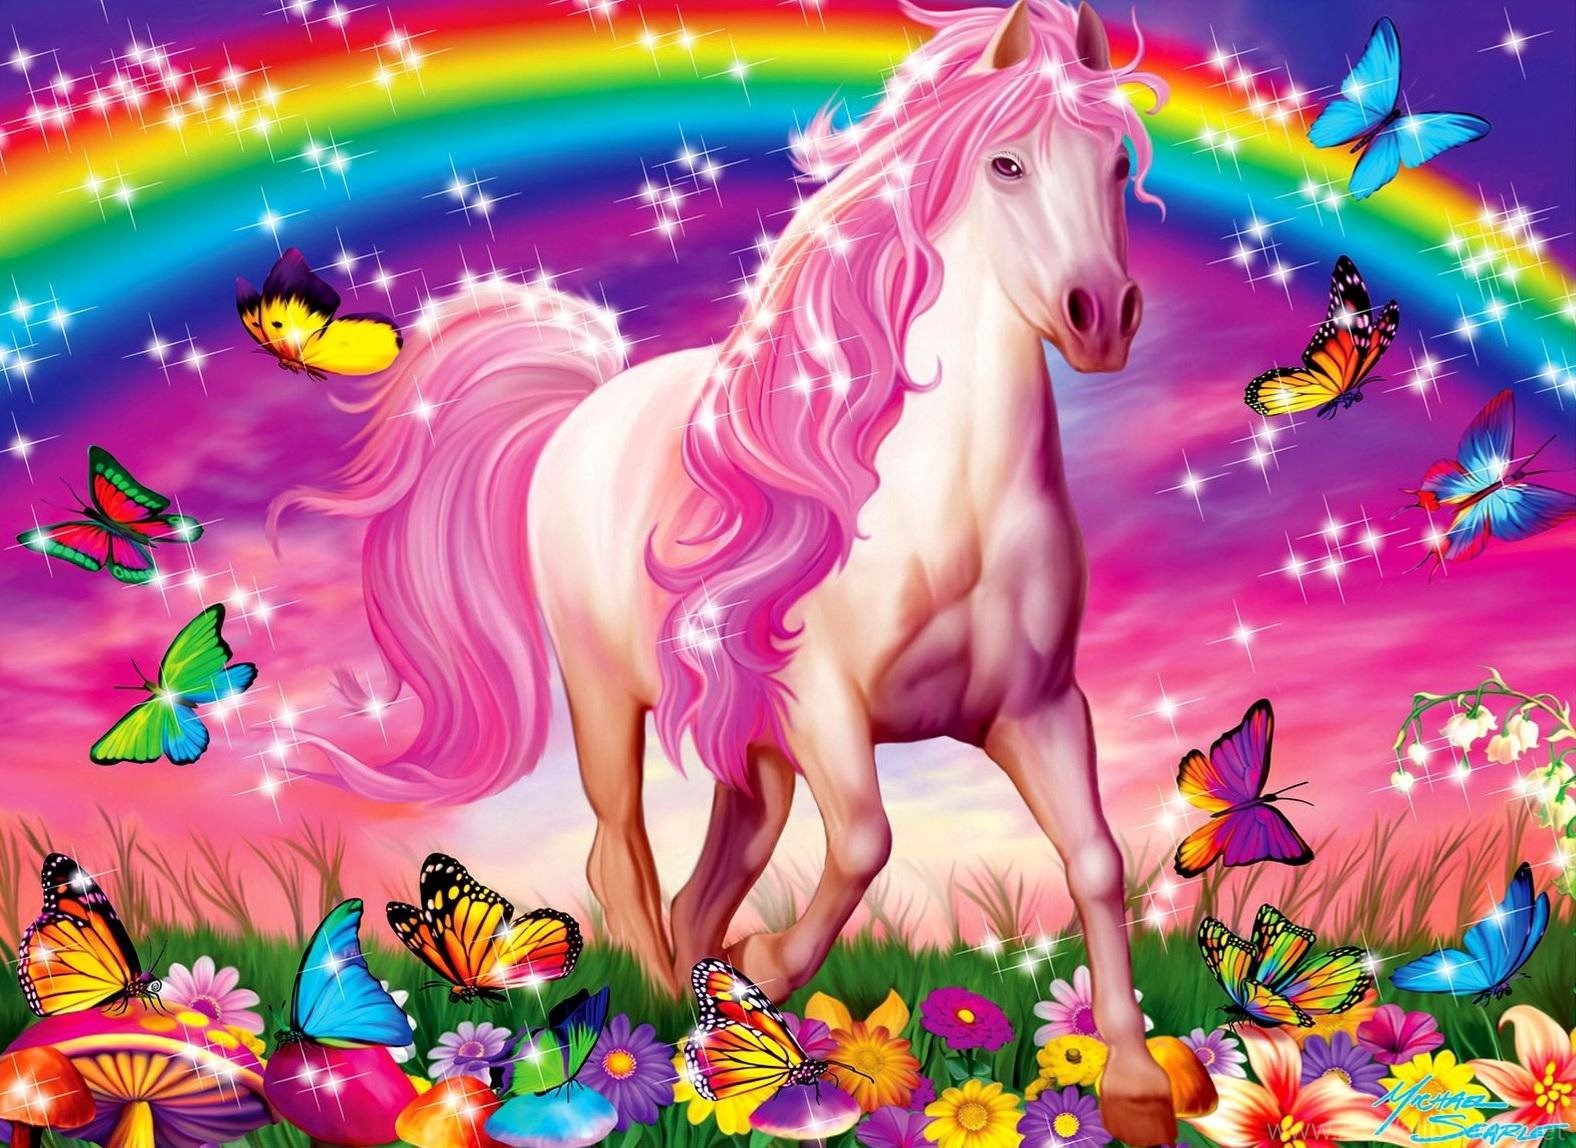 Unicorn And Rainbow Hd Wallpaper Backgrounds Download